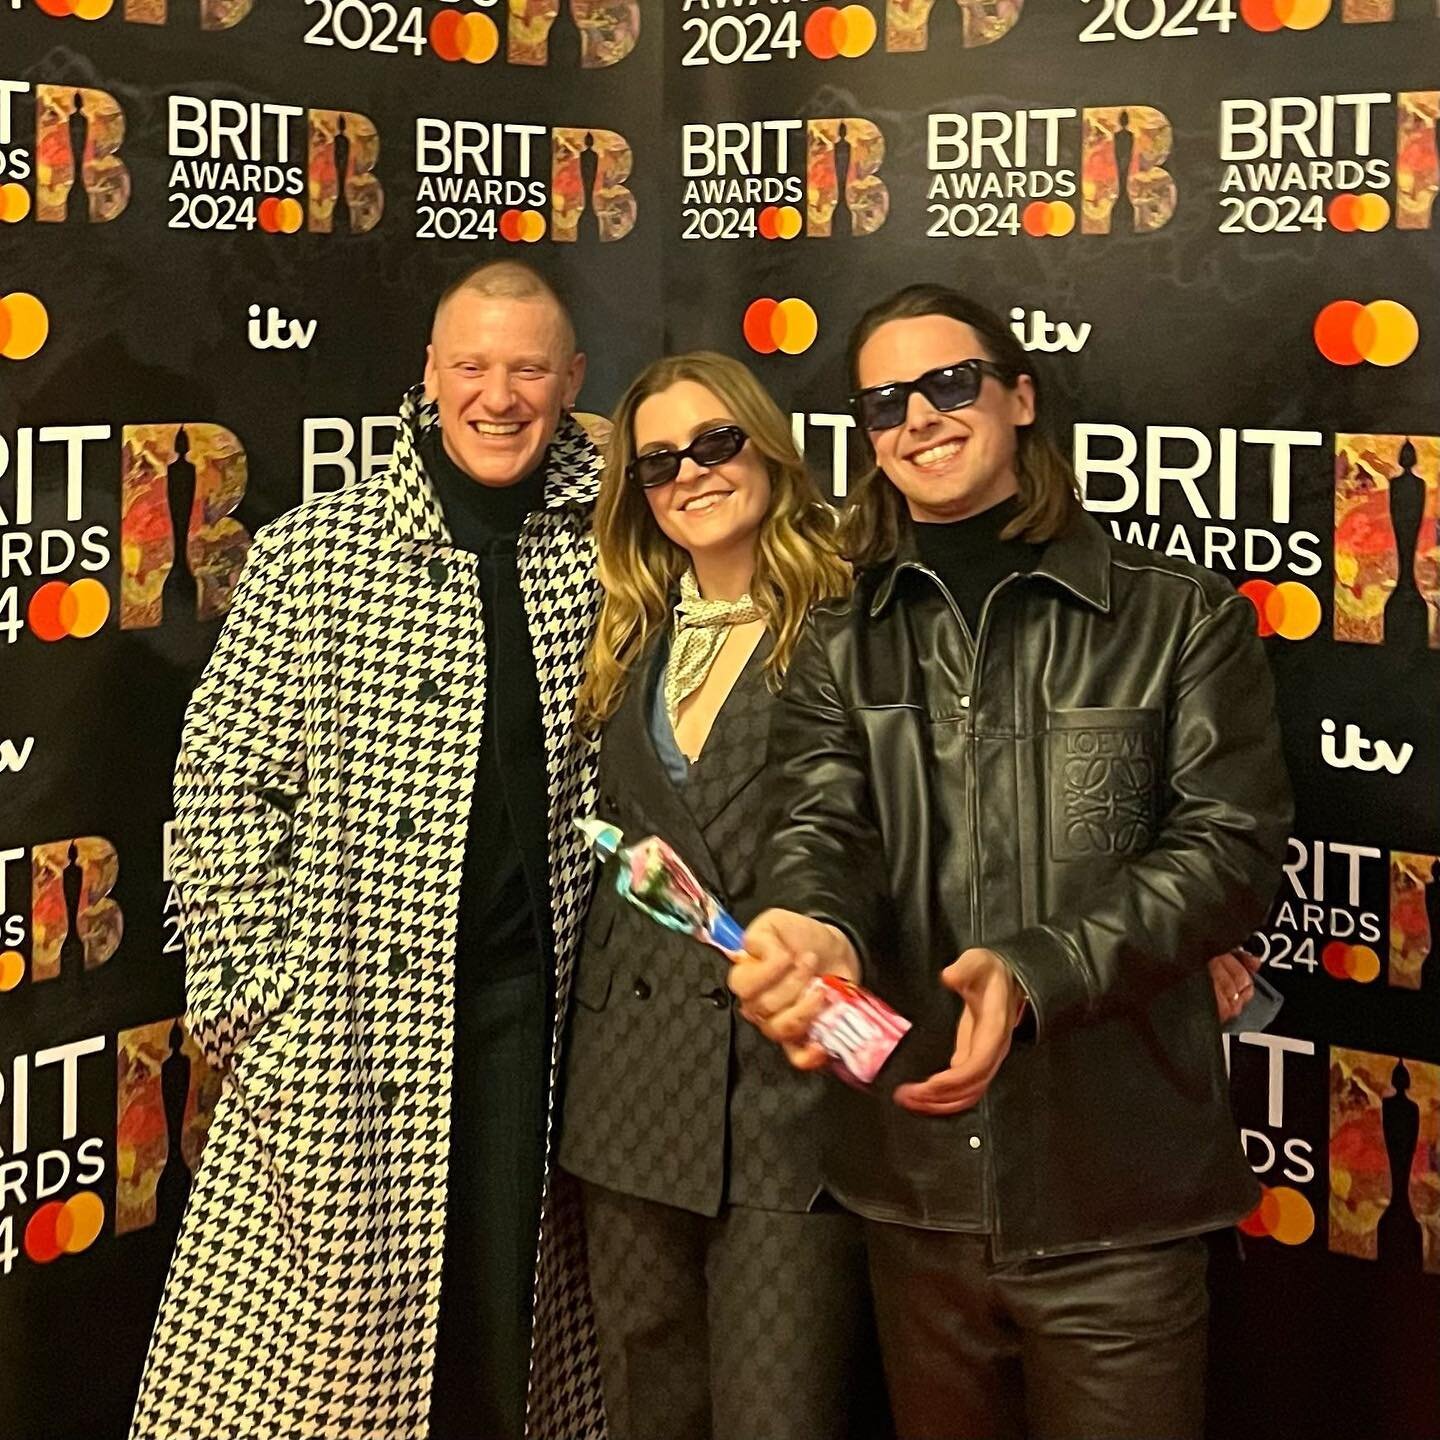 Congratulations to @jungle4eva on their @brits award for Best Group followed by their incredible performance of Back on 74. 

🏆🌋🏆🌋🏆🌋🏆